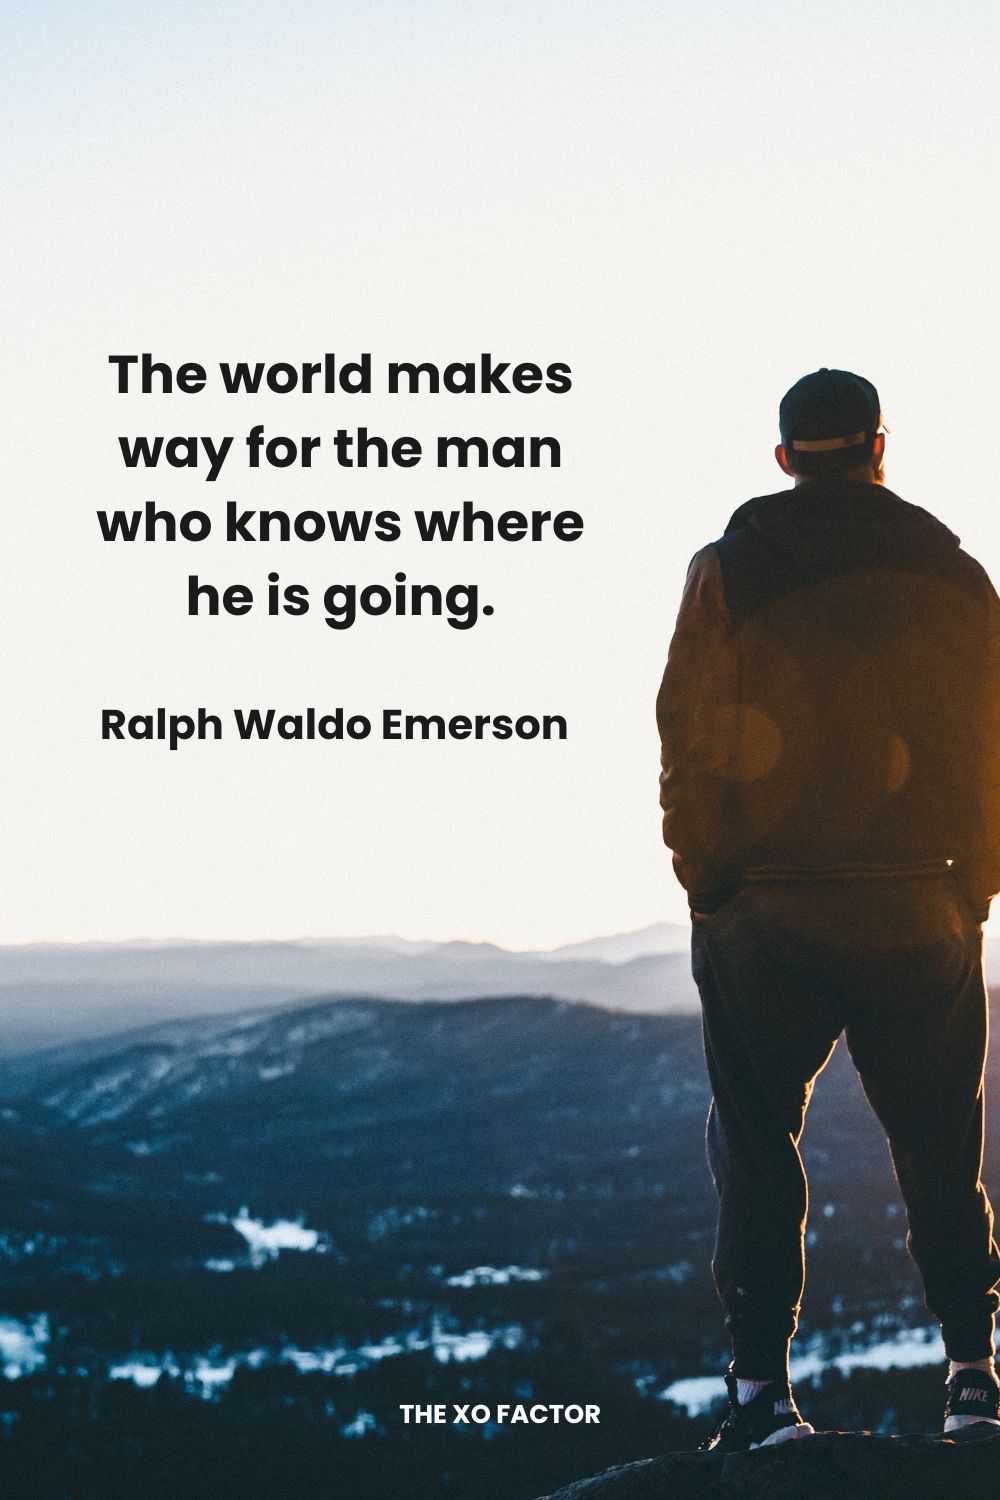 The world makes way for the man who knows where he is going. Ralph Waldo Emerson